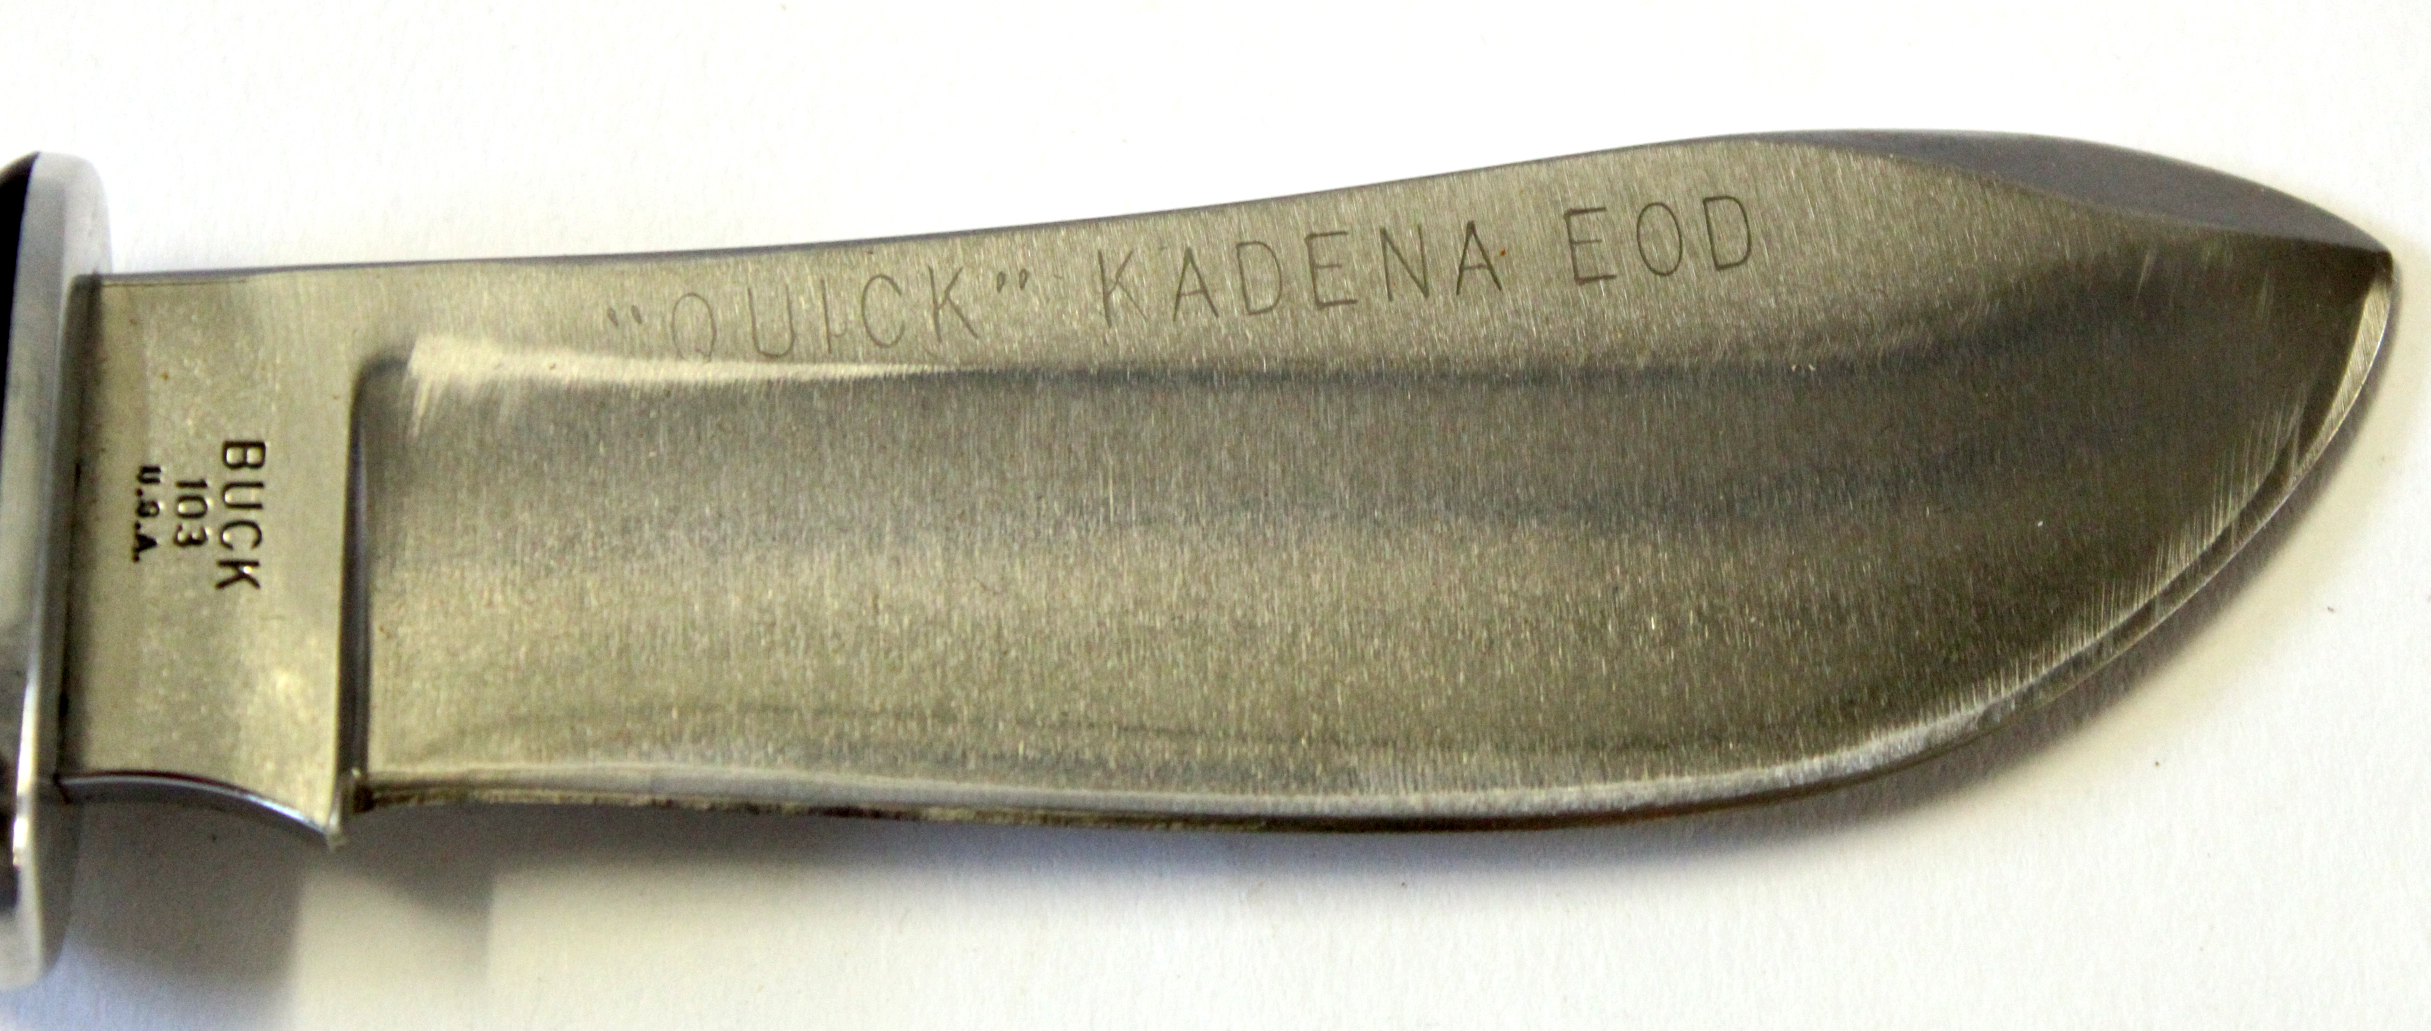 Buck (USA) skinning knife, blade length approx 10cm, complete with sheath, made of bronze - Image 2 of 4